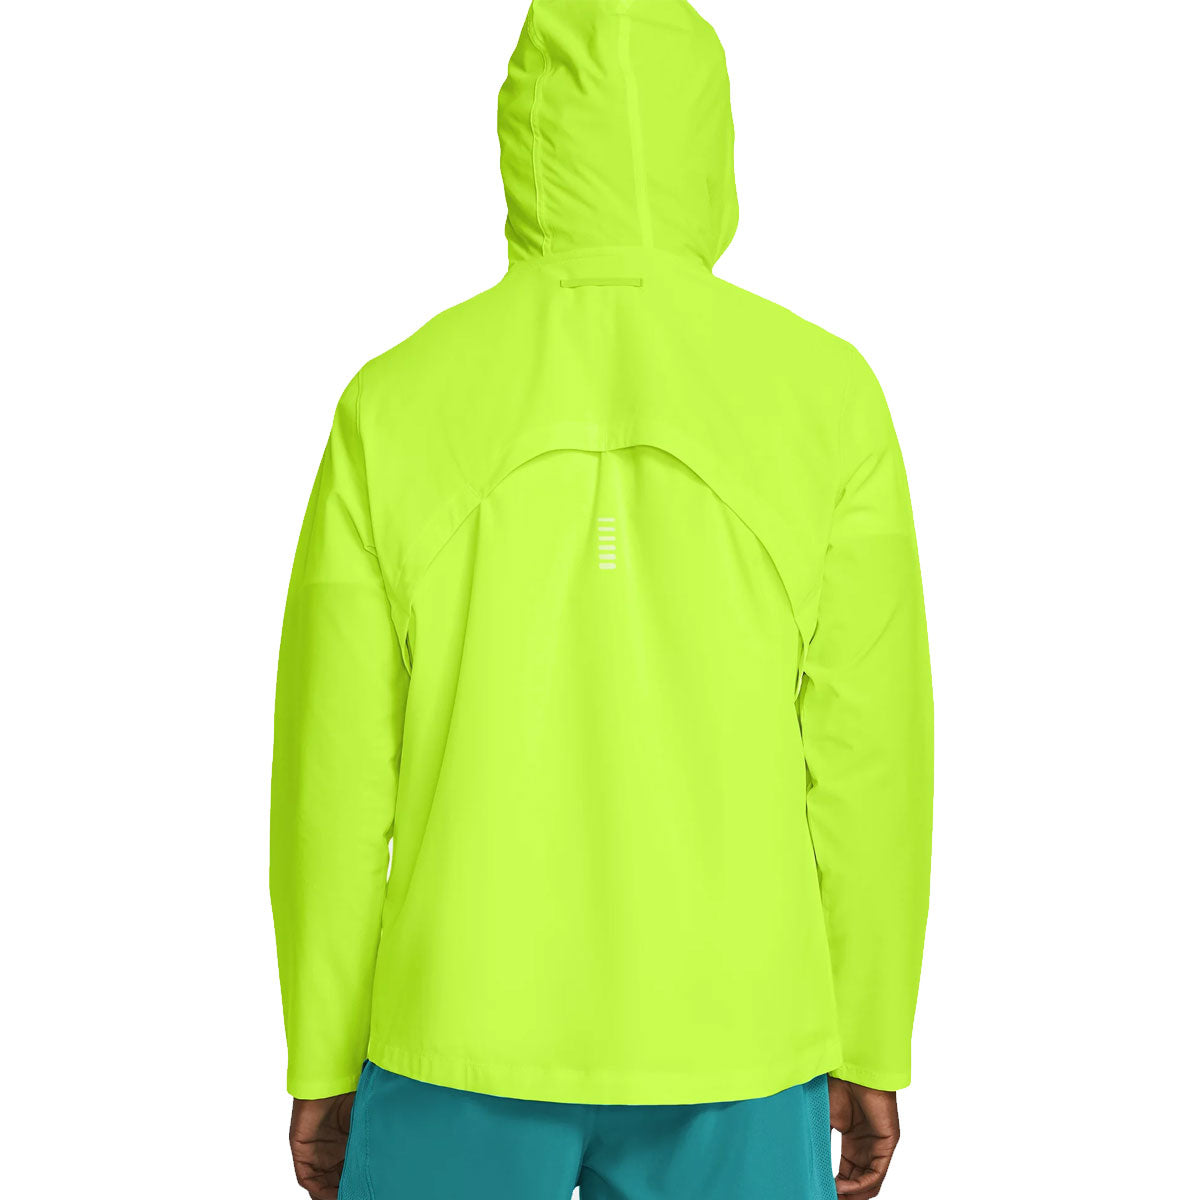 Under Armour Out Run The Storm Jacket - Mens - High Vis Yellow/Black/Reflective